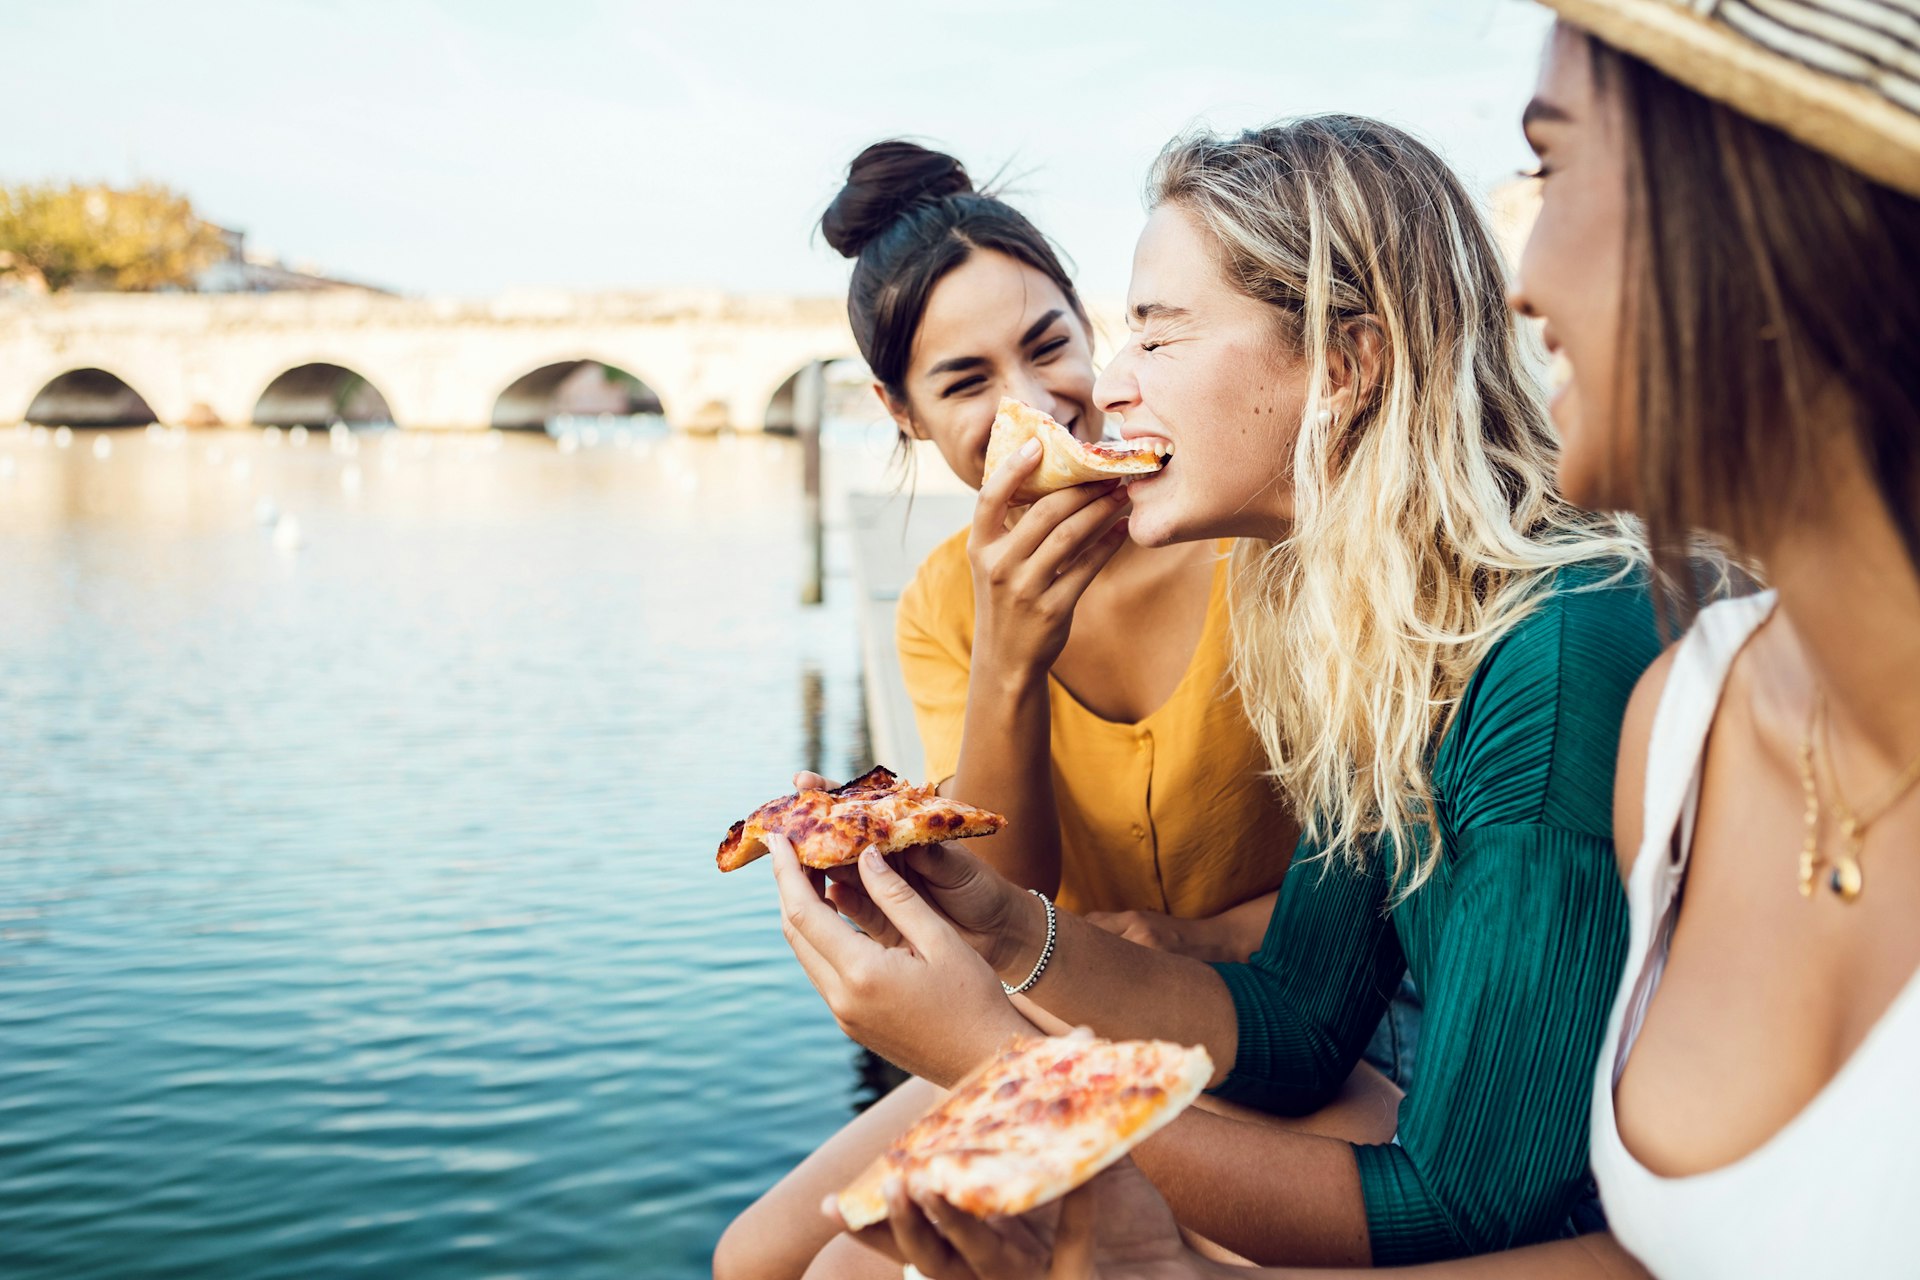 Three friends sit by a river in Italy eating pizza with cheese and tomato